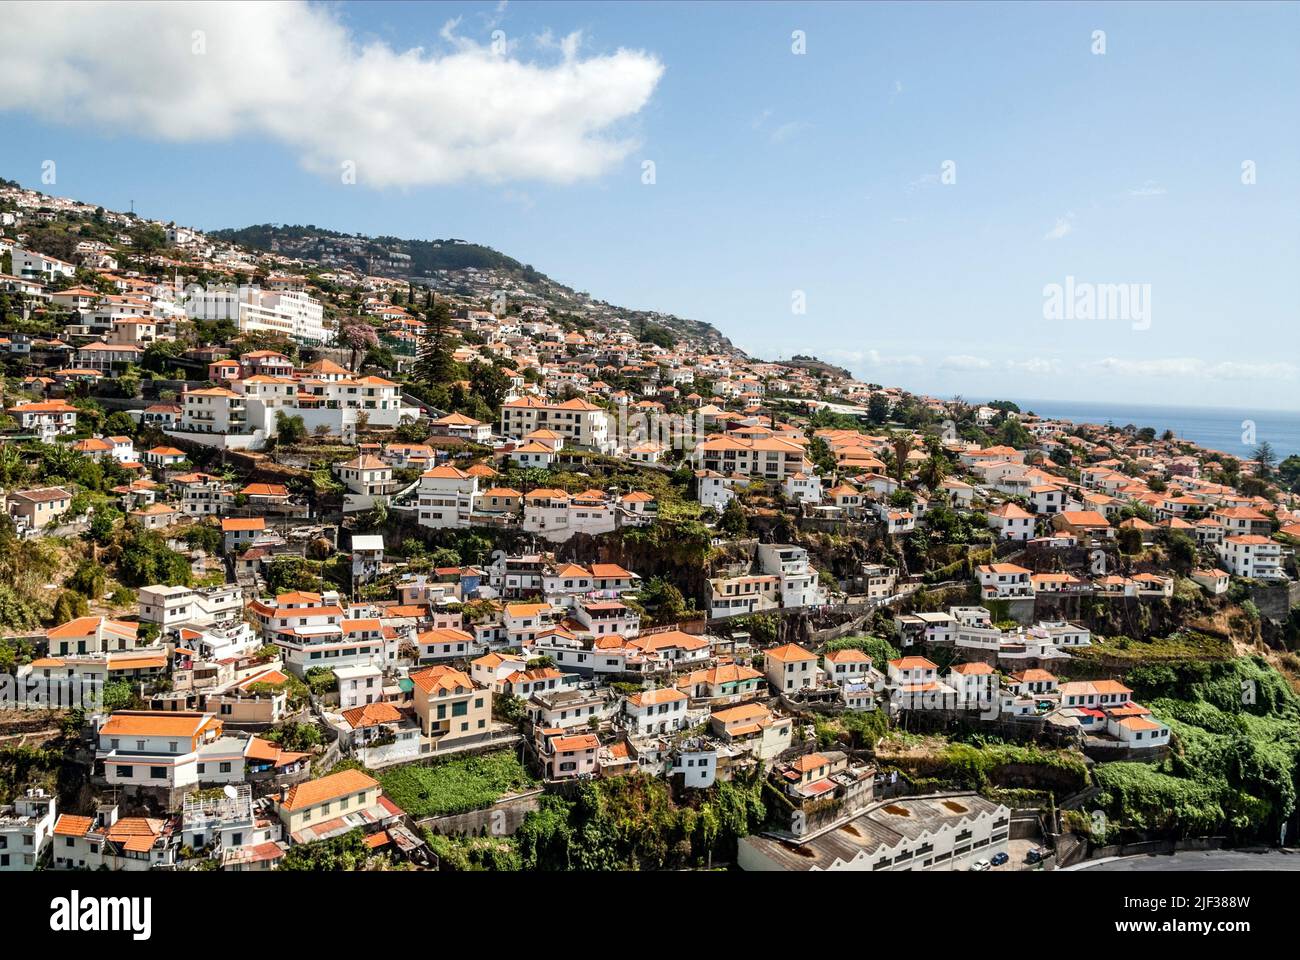 View onto Funchal seen from the mountain side, Madeira, Funchal Stock Photo